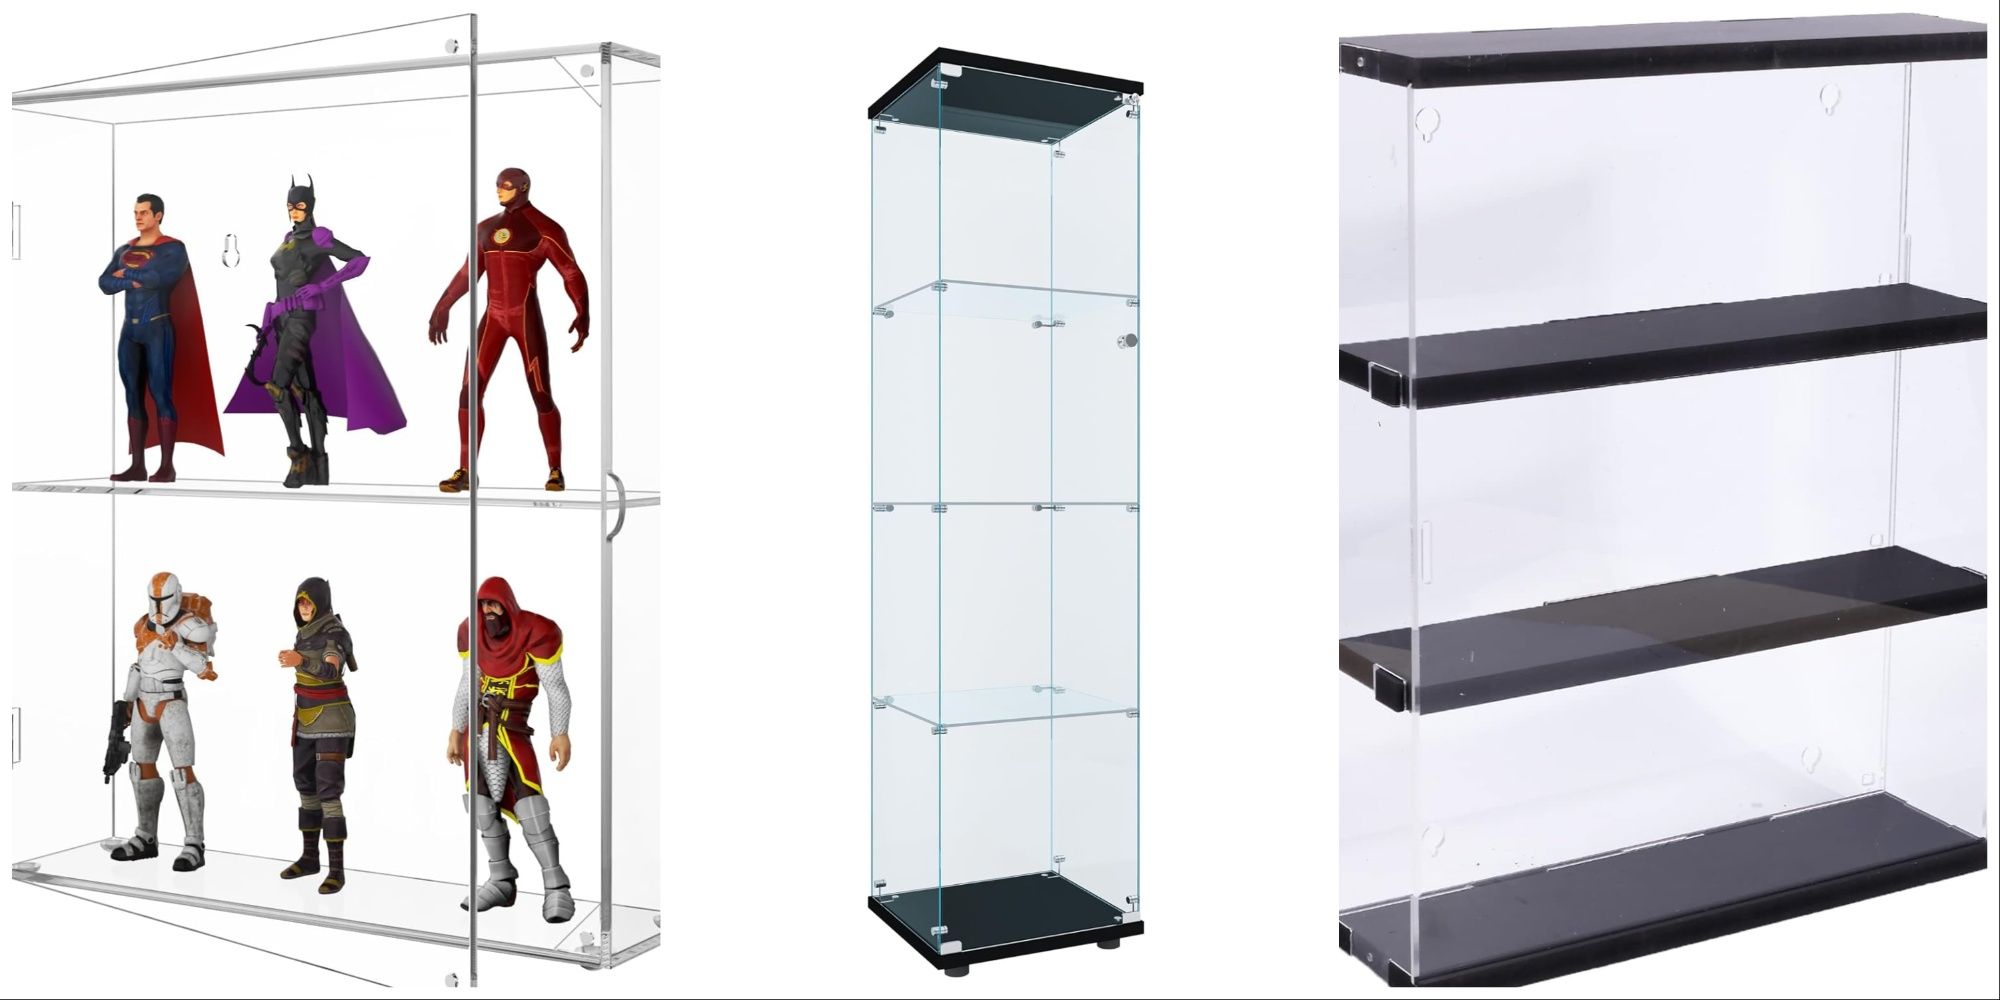 An image with three display cases split into vertical columns. The left is a two-tiered display with action figures, the center a tall three-tiered display, and the right a wide three-tiered display.